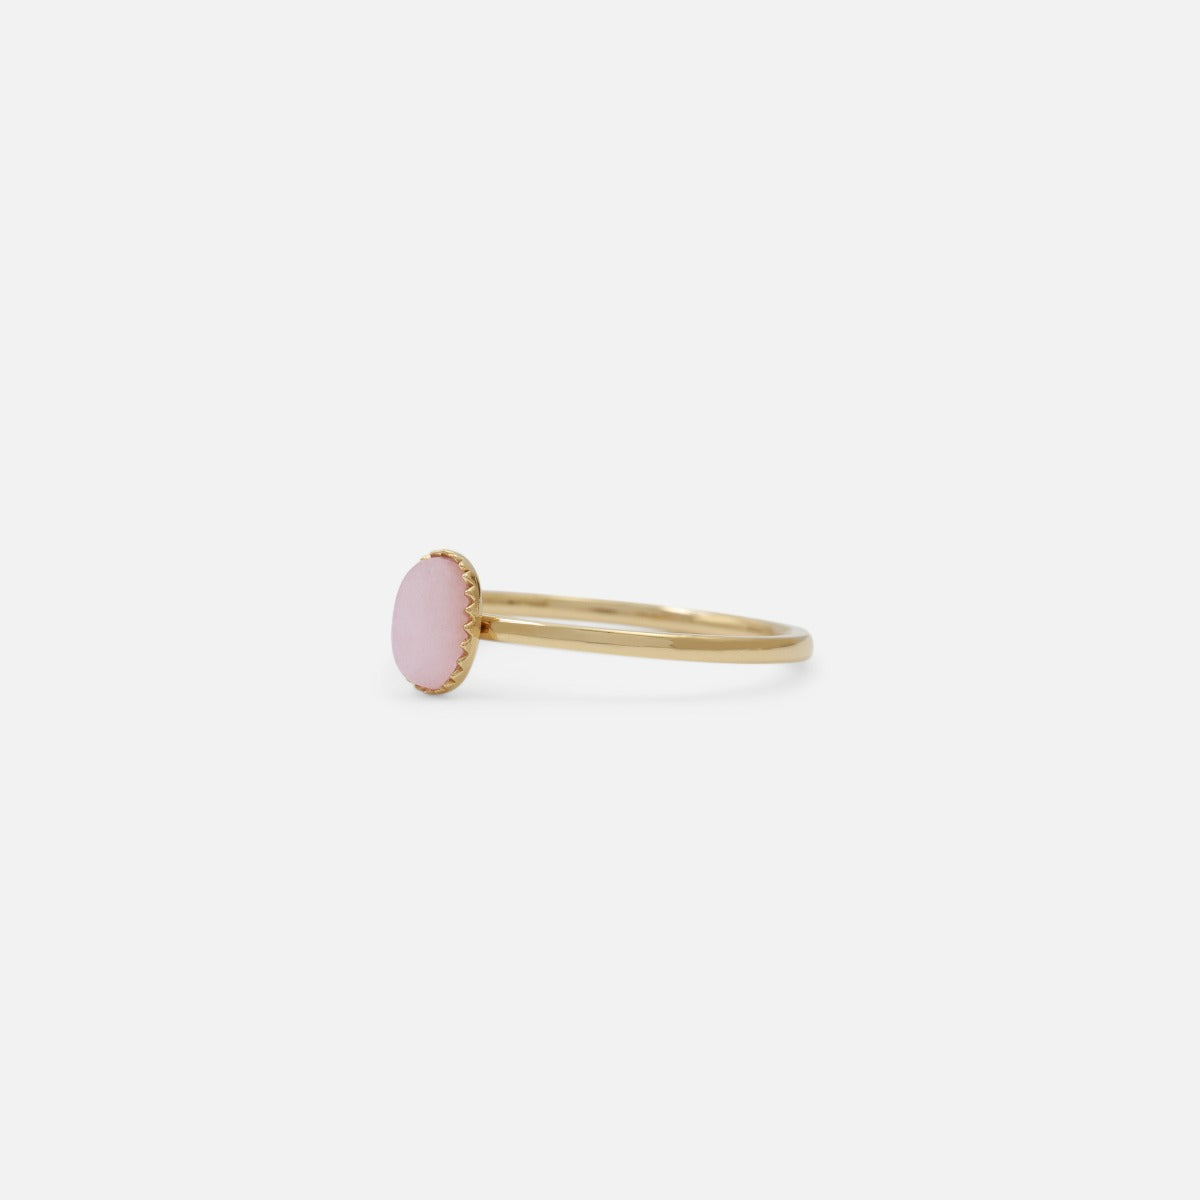 Set of golden stainless steel rings with pink stone and pearl